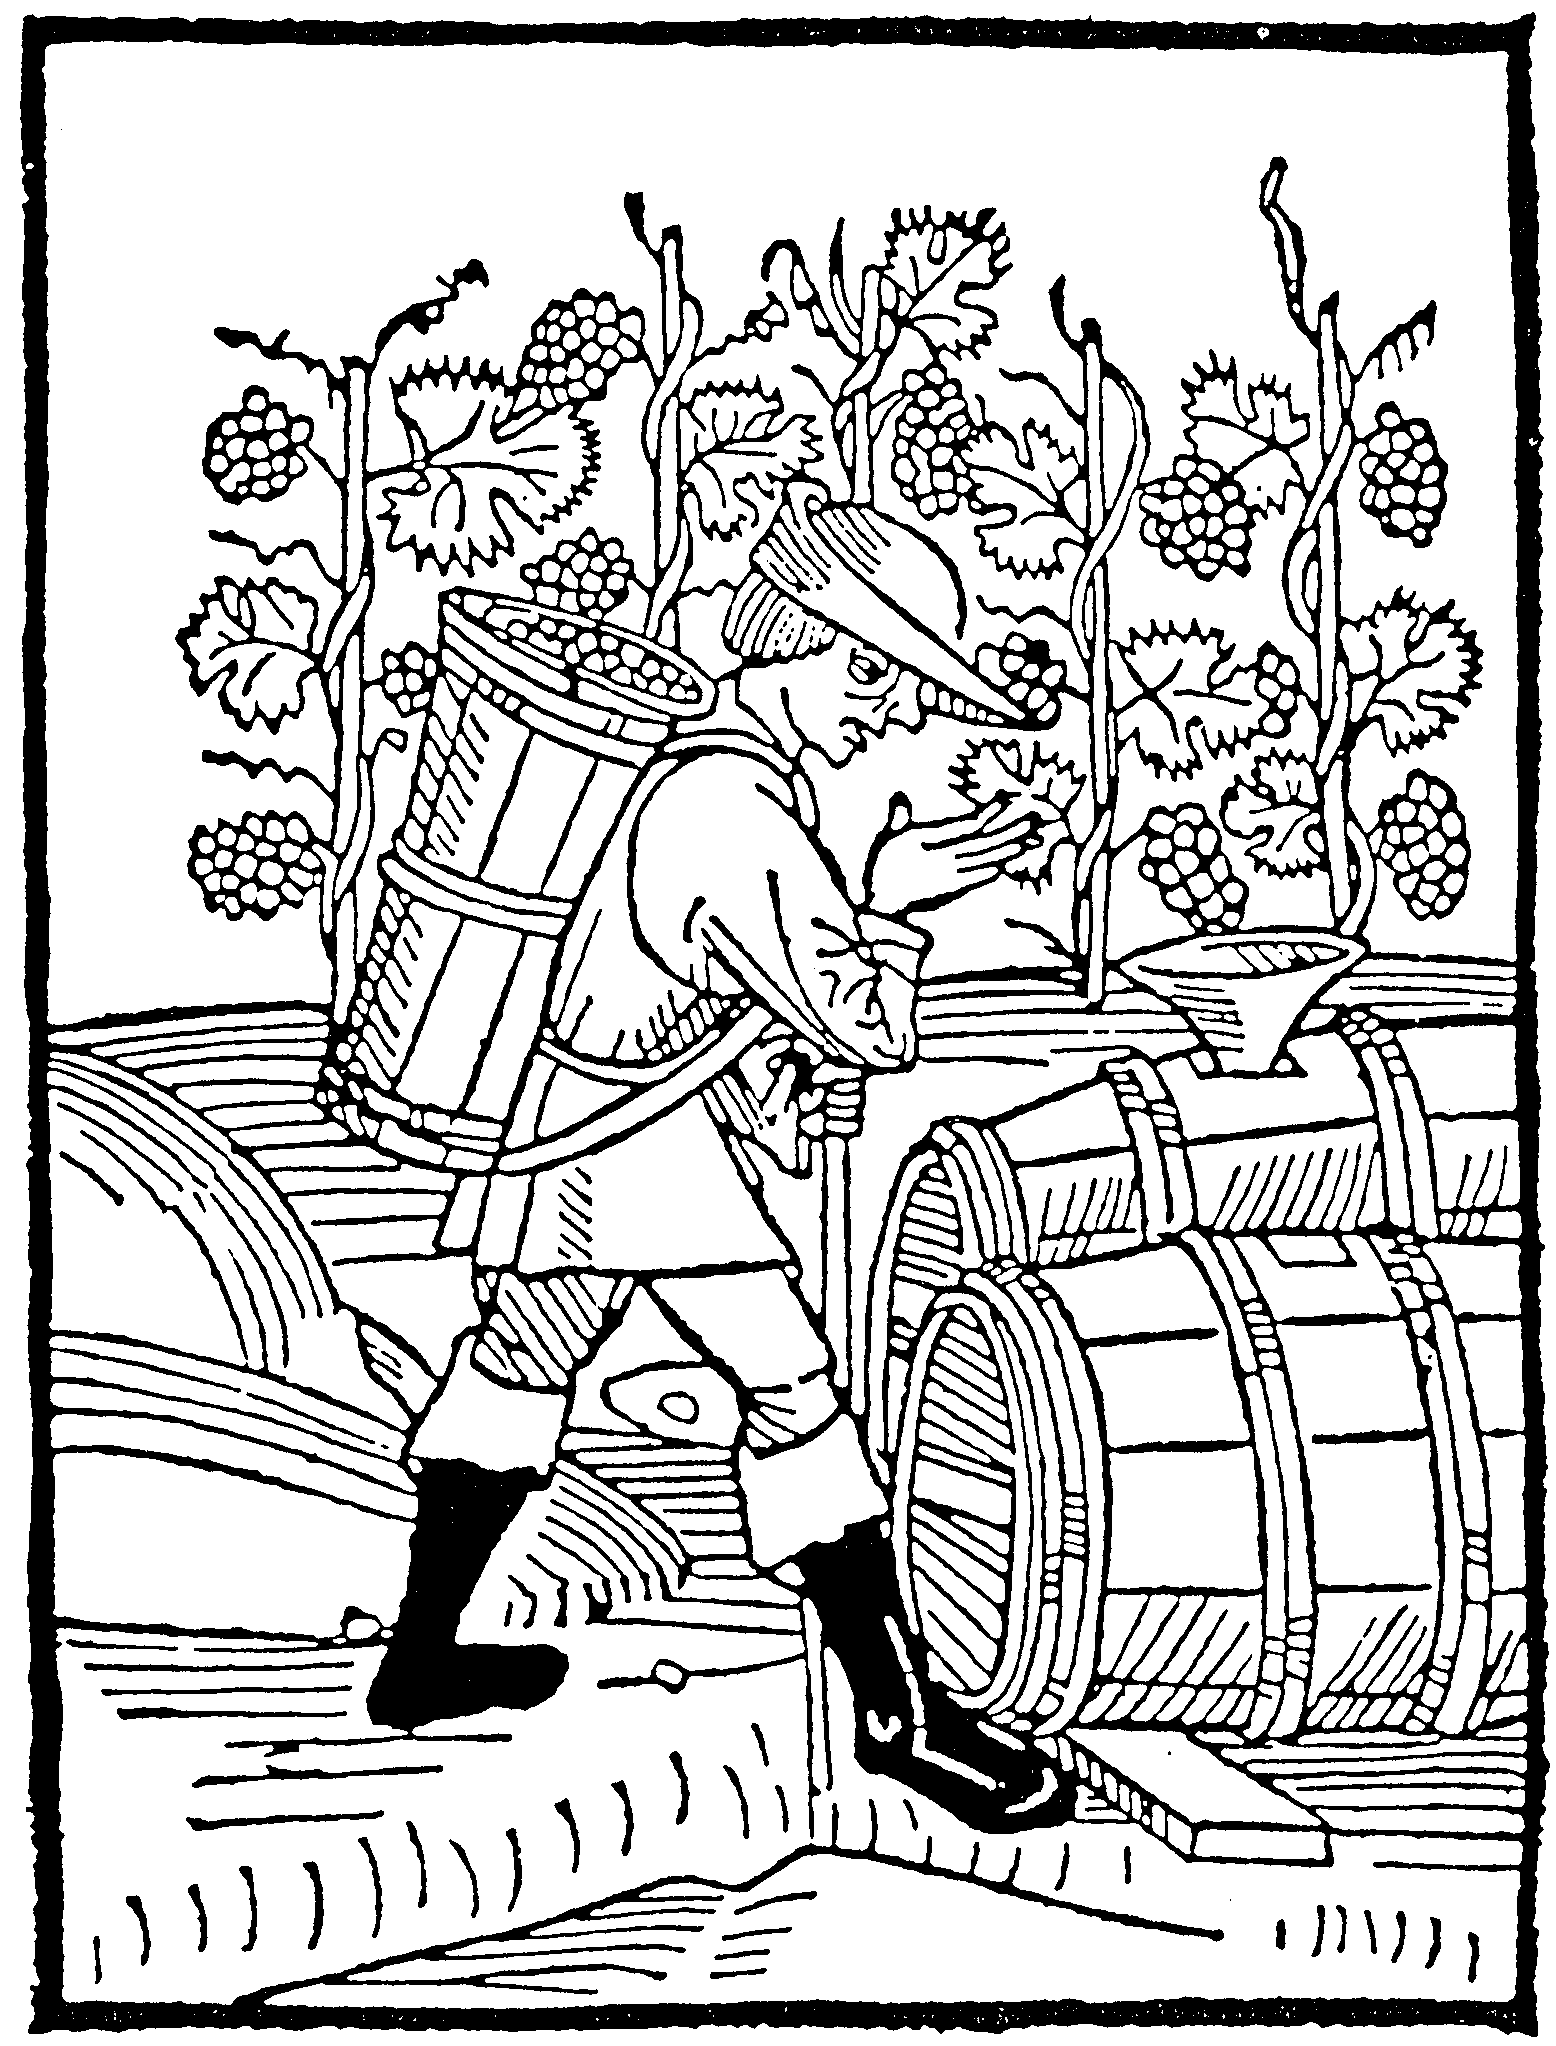 bakery clipart medieval